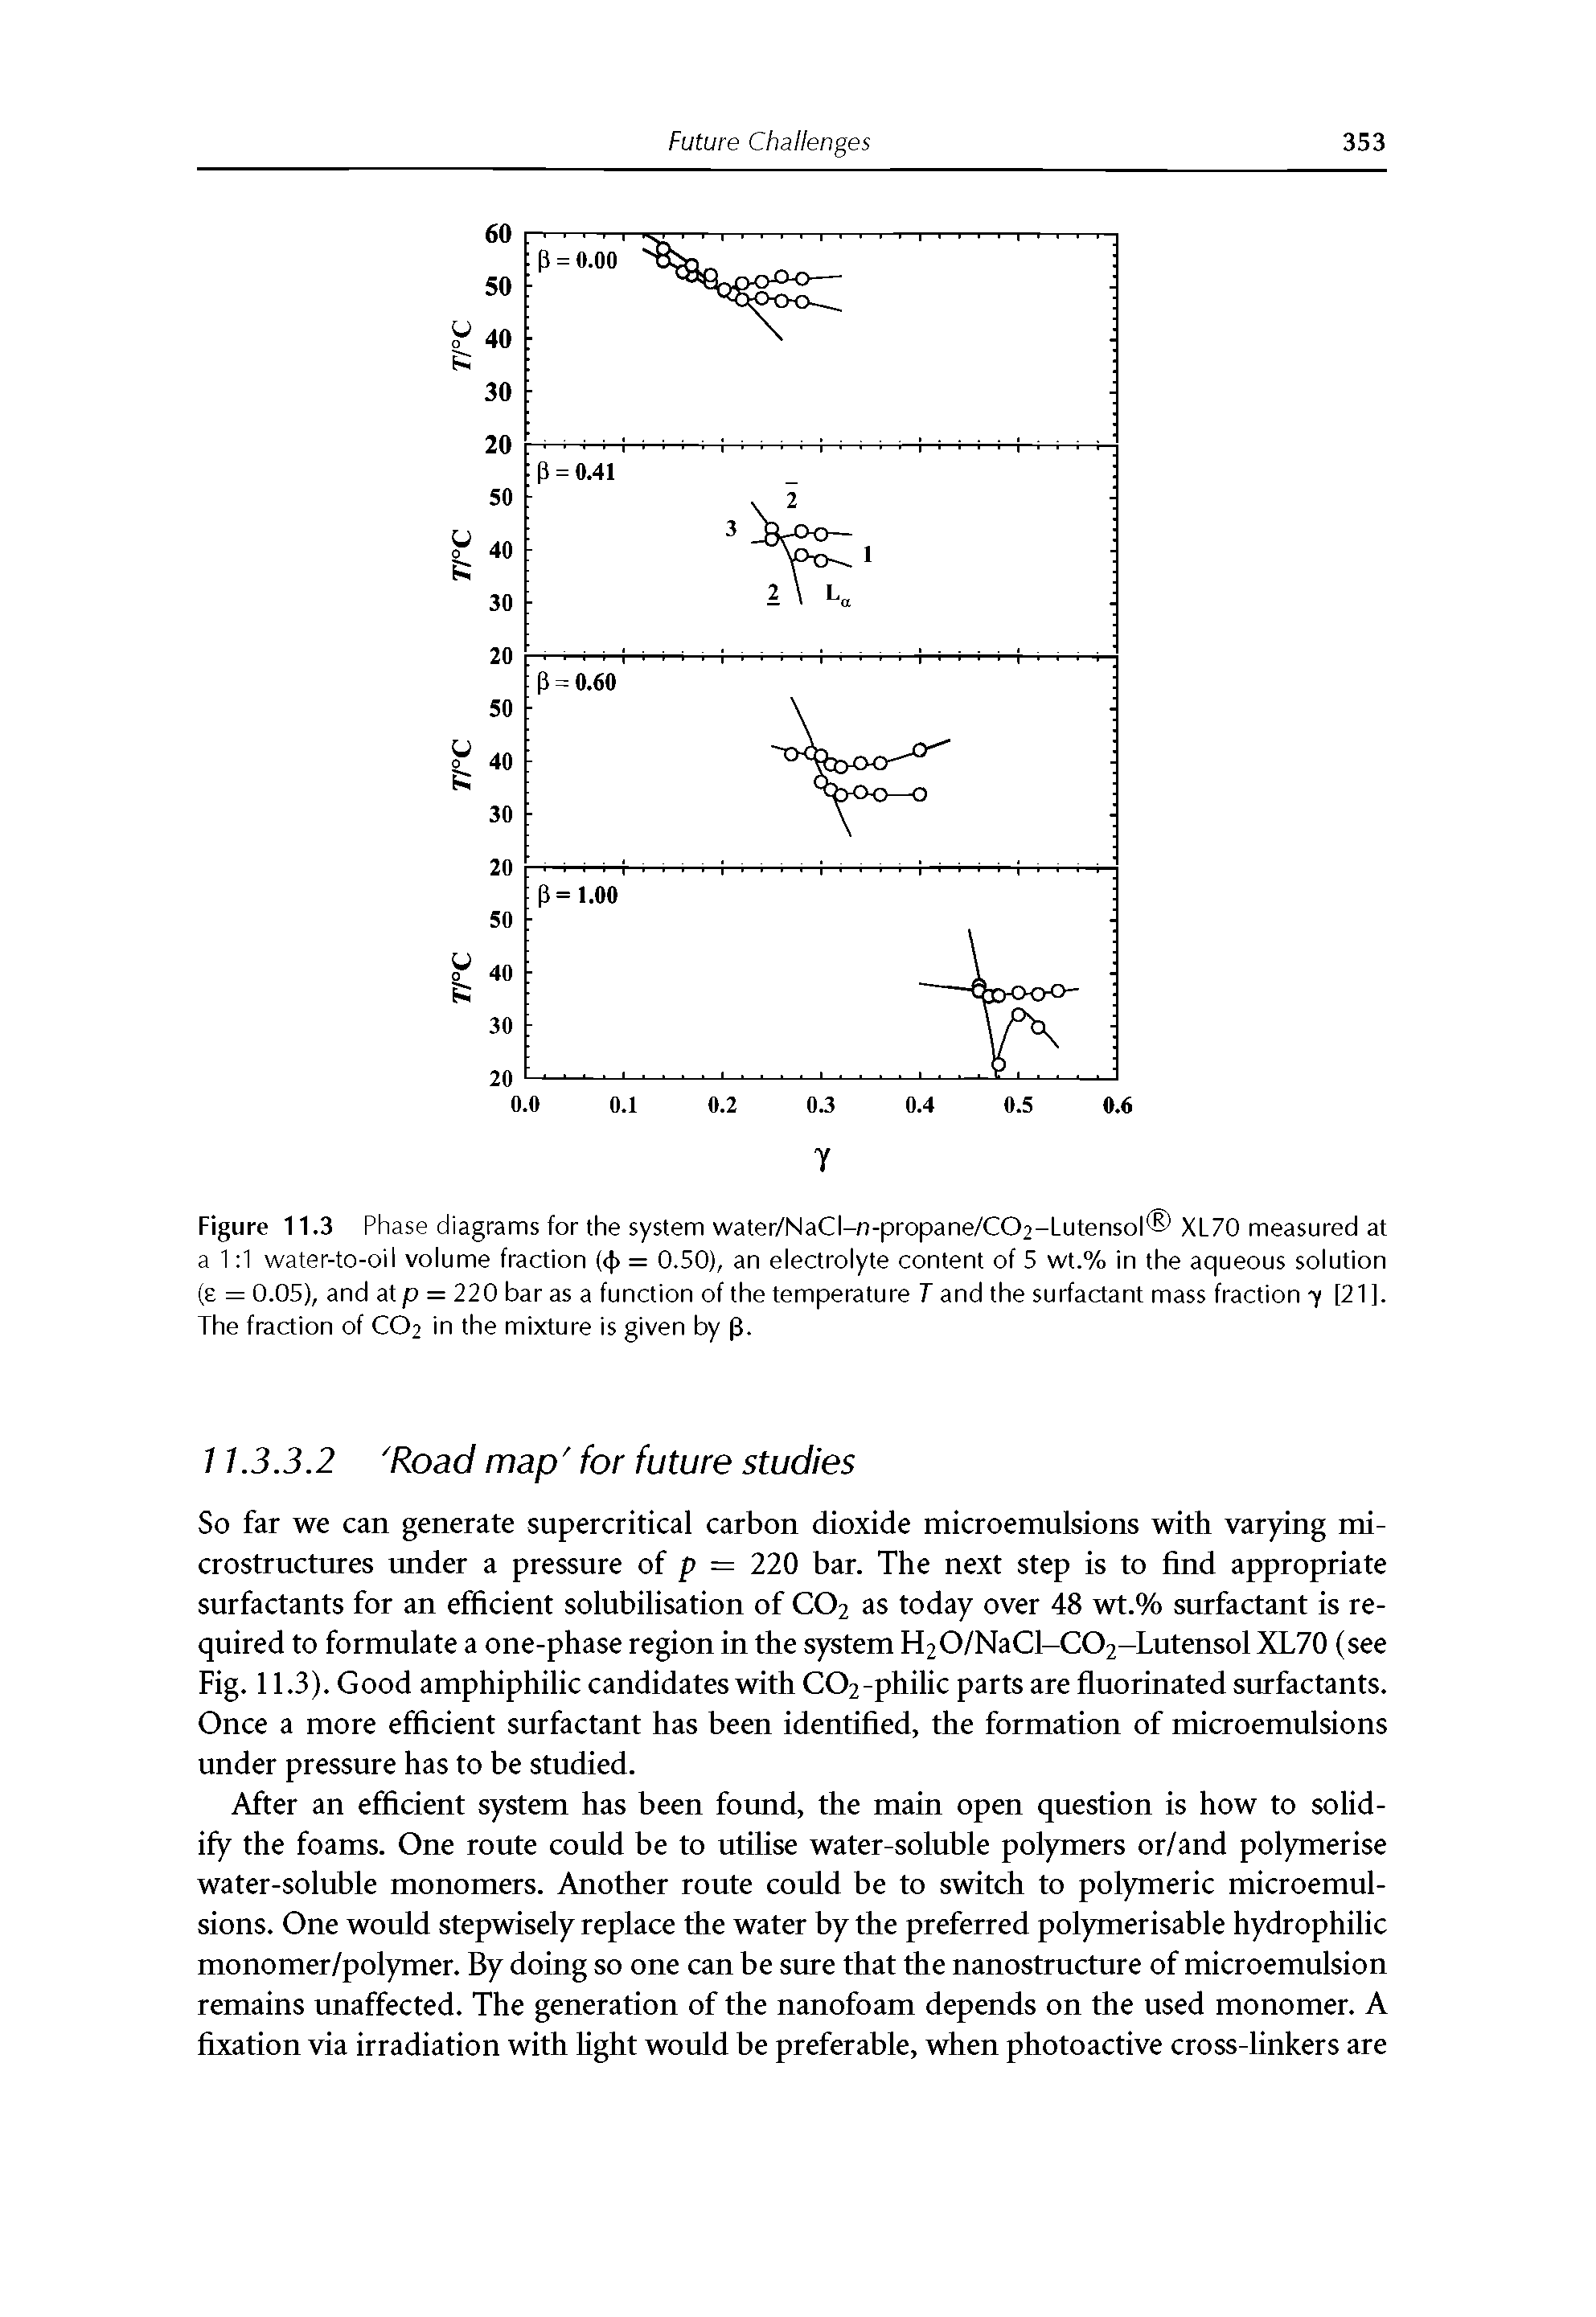 Figure 11.3 Phase diagrams for the system water/NaCI-n-propane/C02-Lutensol XL70 measured at a 1 1 water-to-oil volume fraction (<J> = 0.50), an electrolyte content of 5 wt.% in the aqueous solution (e = 0.05), and at p = 220 bar as a function of the temperature T and the surfactant mass fraction y [21 ]. The fraction of CO2 in the mixture is given by (3.